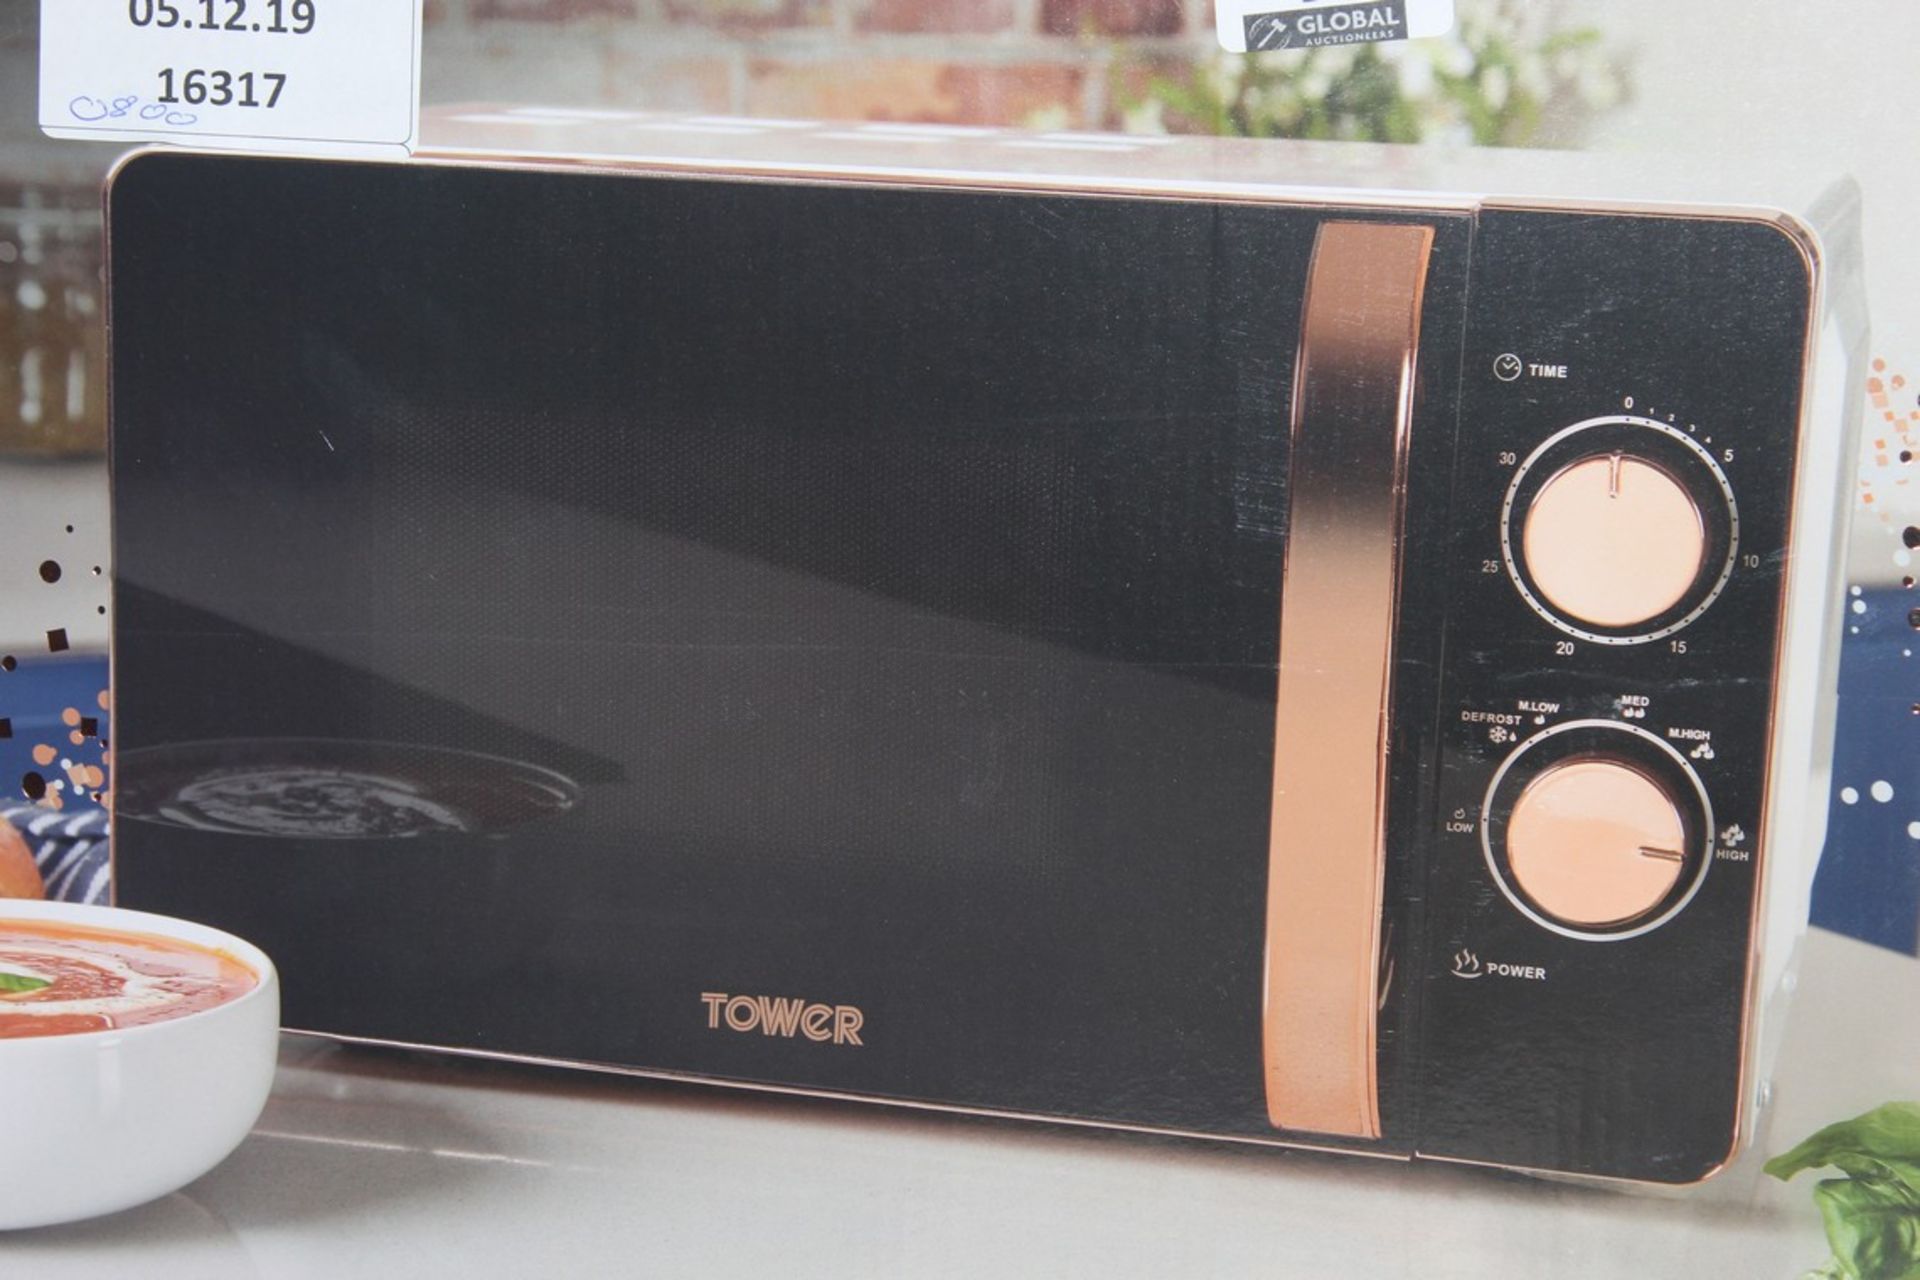 Boxed Tower Rose Gold Edition Manual Microwave RRP £80 (16317) (Public Viewing and Appraisals